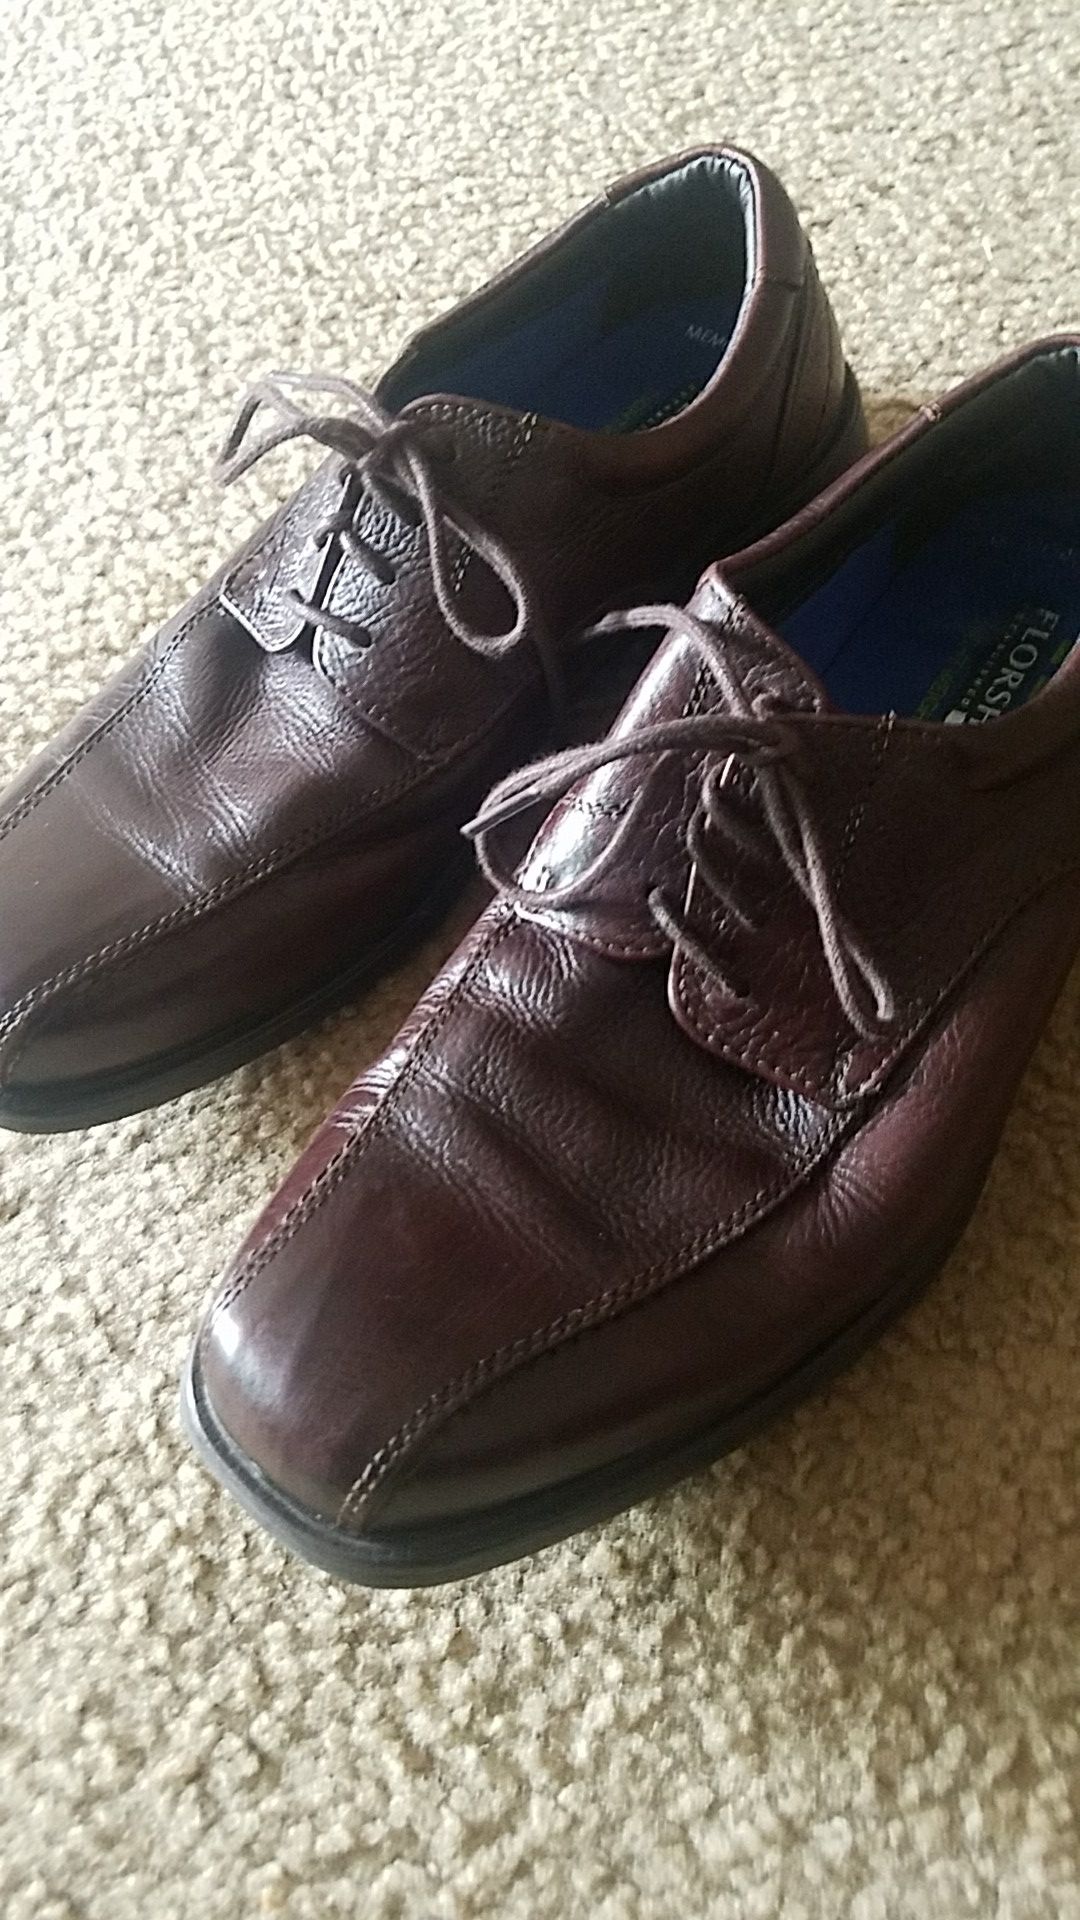 BROWN Leather Shoes w/ Memory Foam